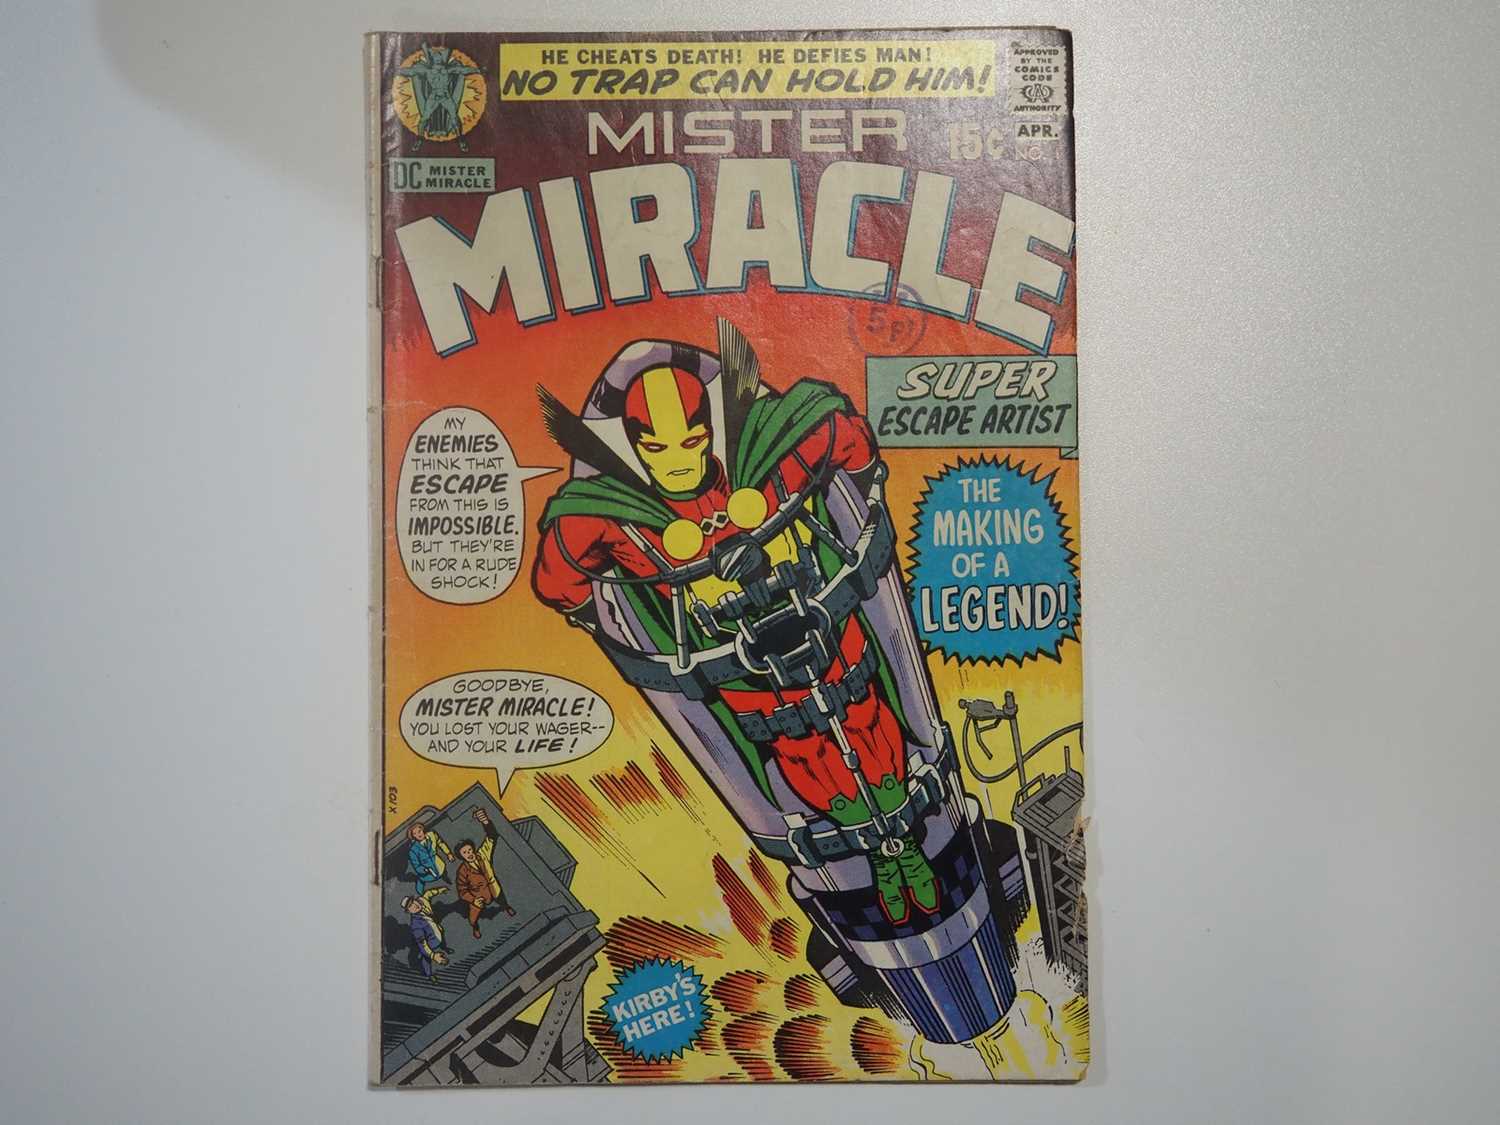 MISTER MIRACLE #1, 2, 3, 4, 5, 6, 7, 8, 9, 10, 11, 12, 13, 17 (14 in Lot) - (1971/1974 - DC) - - Image 3 of 12